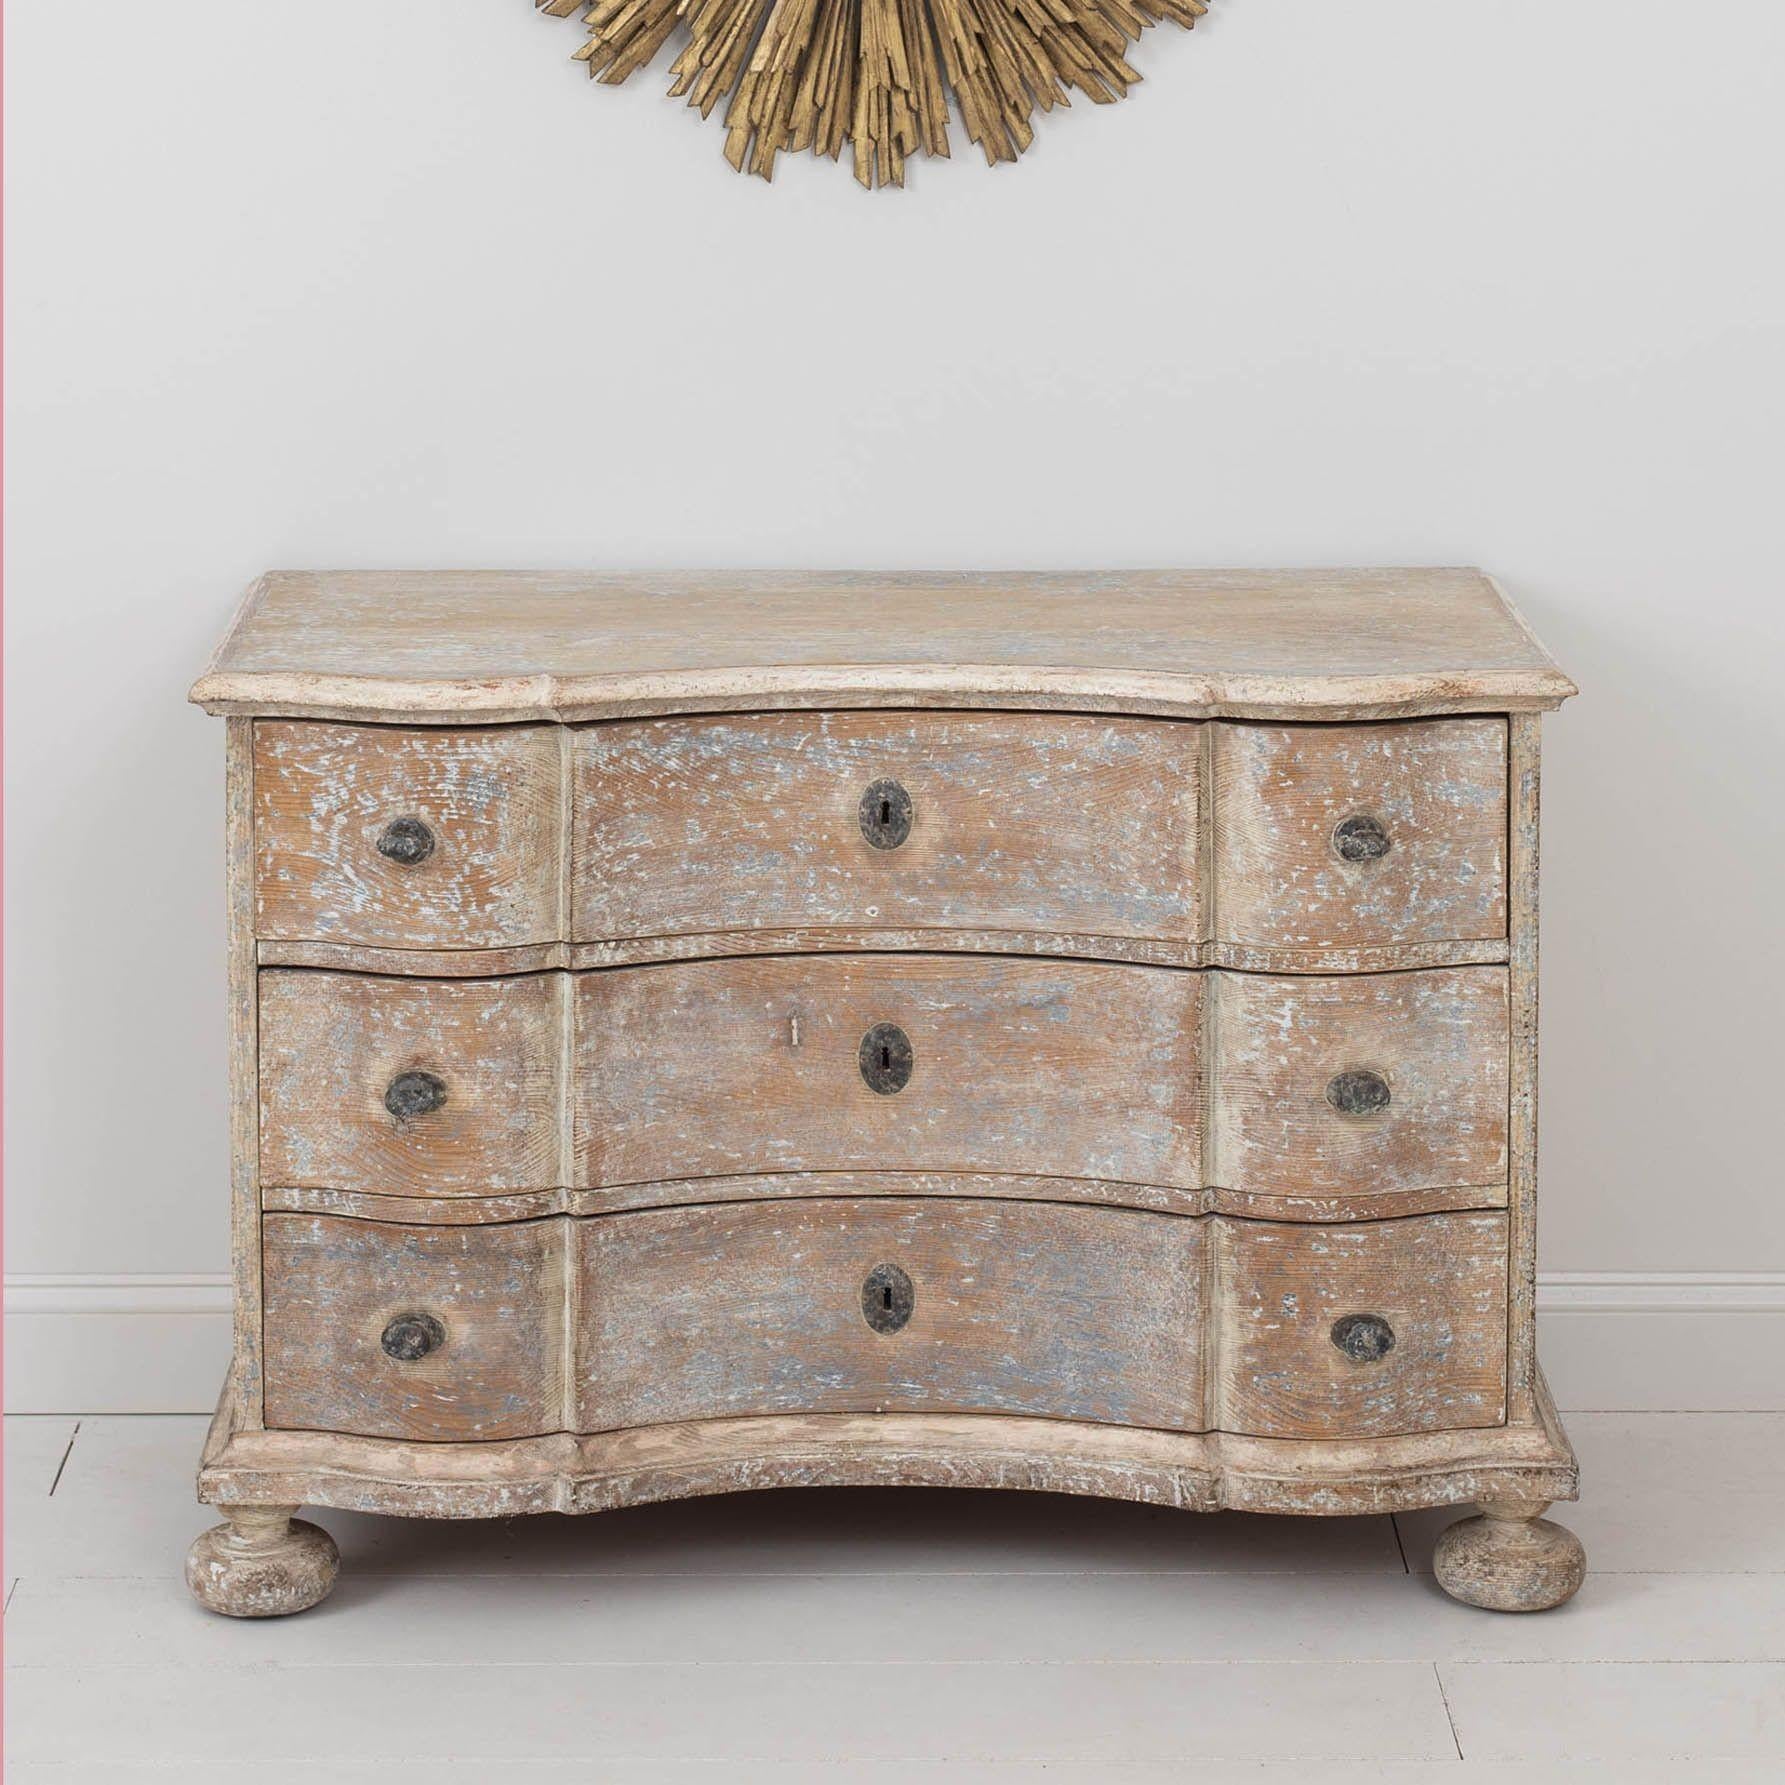 18th c. German Baroque Commode in Original Patina with Arbalette Shaped Front In Excellent Condition For Sale In Wichita, KS